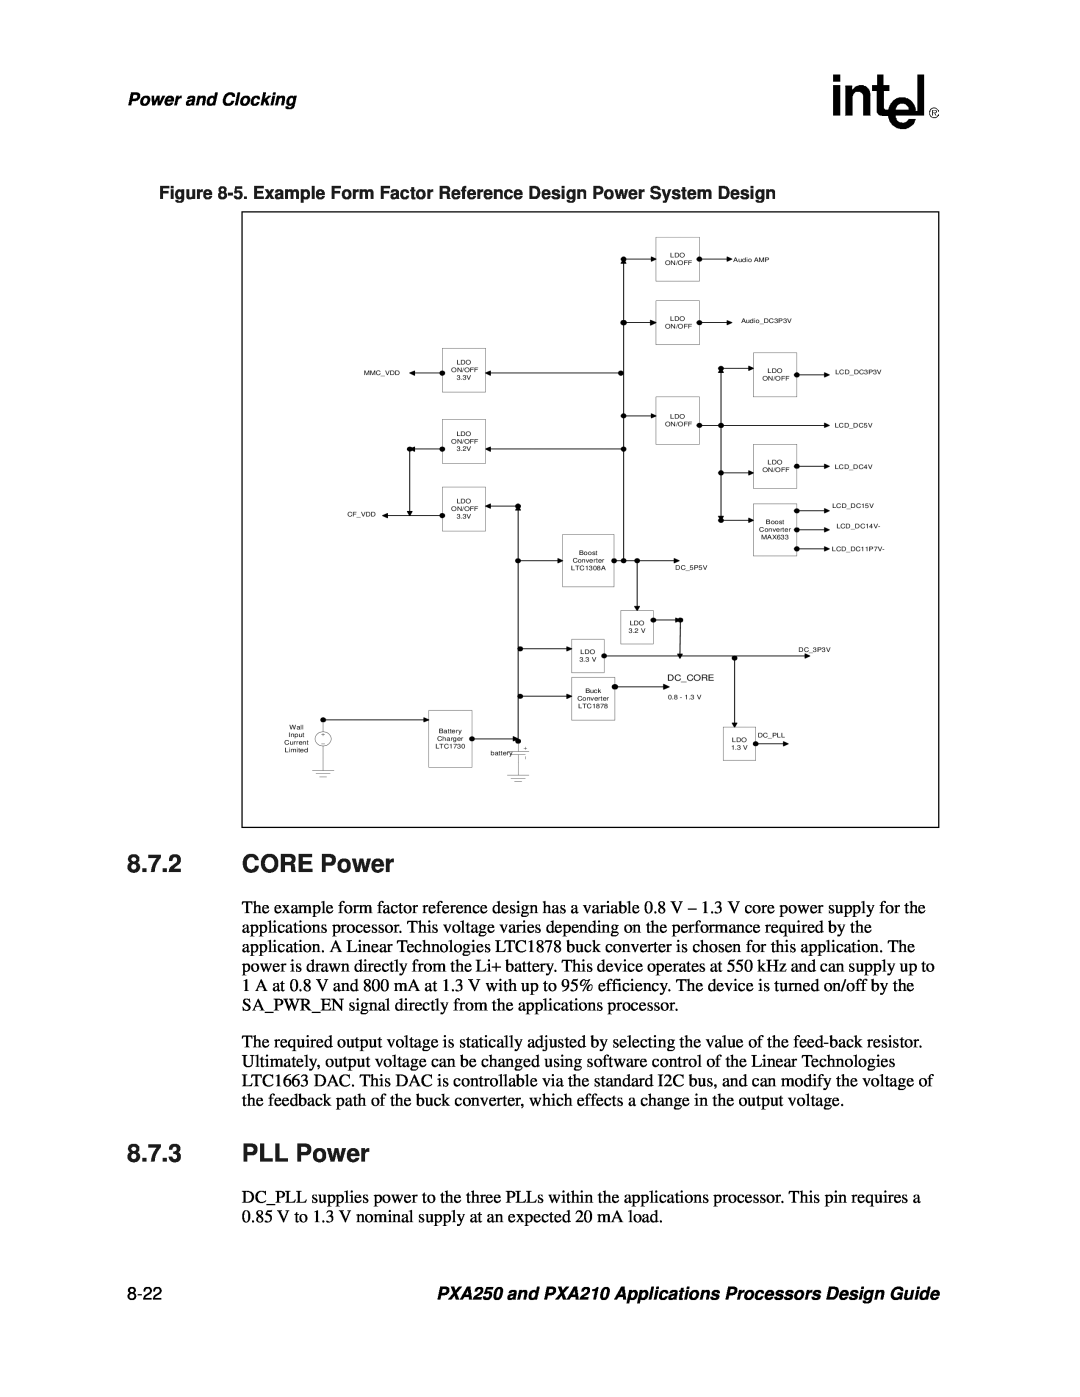 Intel manual CORE Power, PLL Power, Power and Clocking, PXA250 and PXA210 Applications Processors Design Guide 